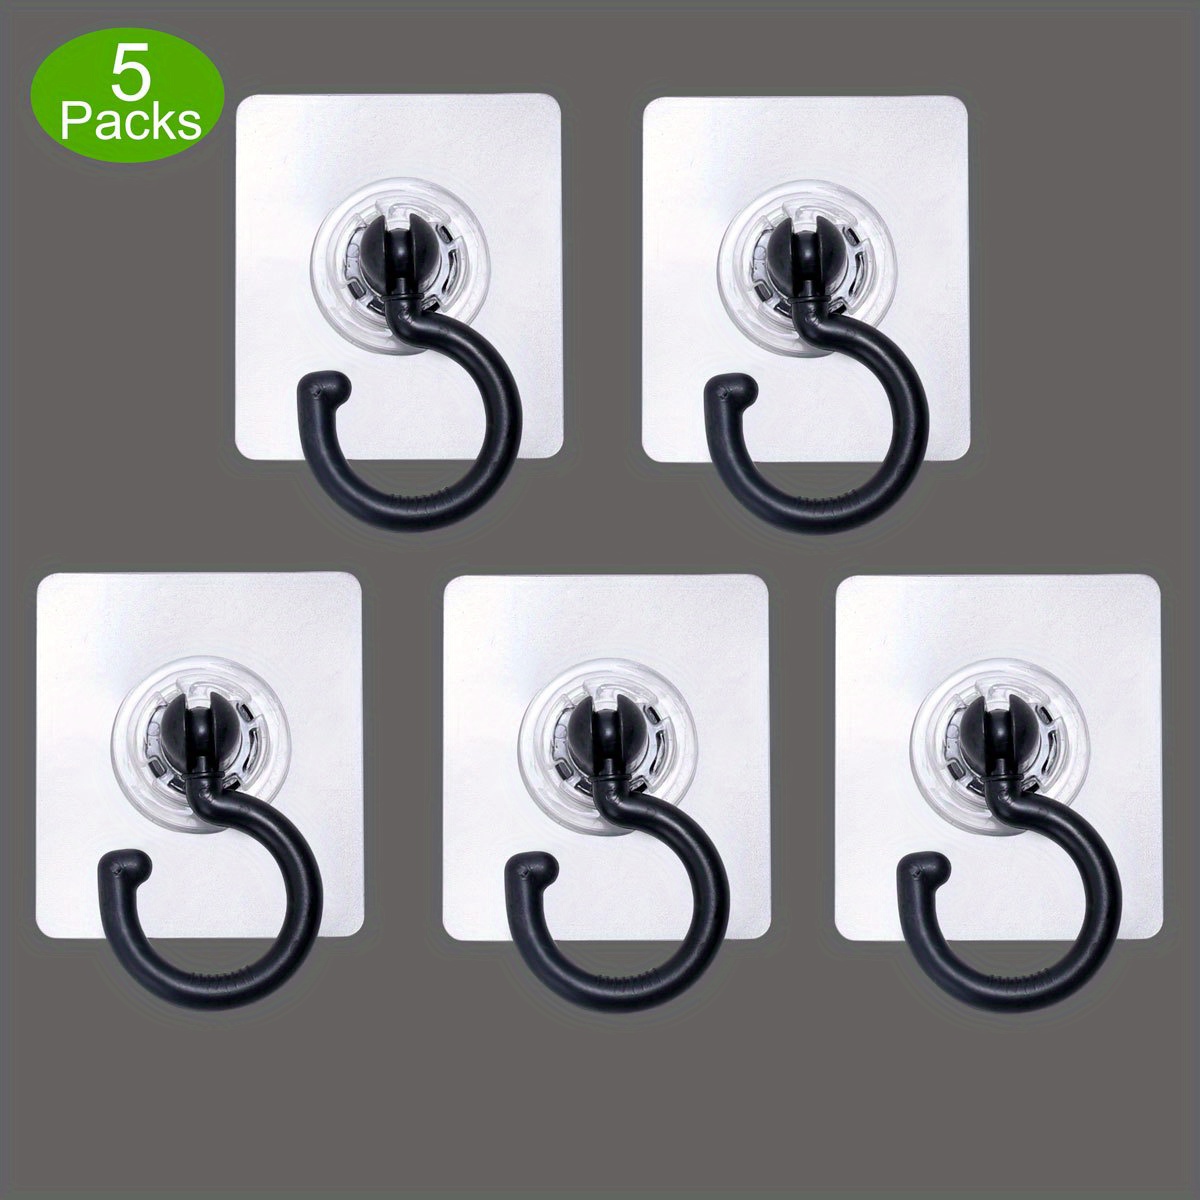 No Hole Adhesive Ceiling Hooks for Hanging Light Plants,Sticky Eye Hooks for Hanging Boby Mobile Curtain,Set of 10 (Round)